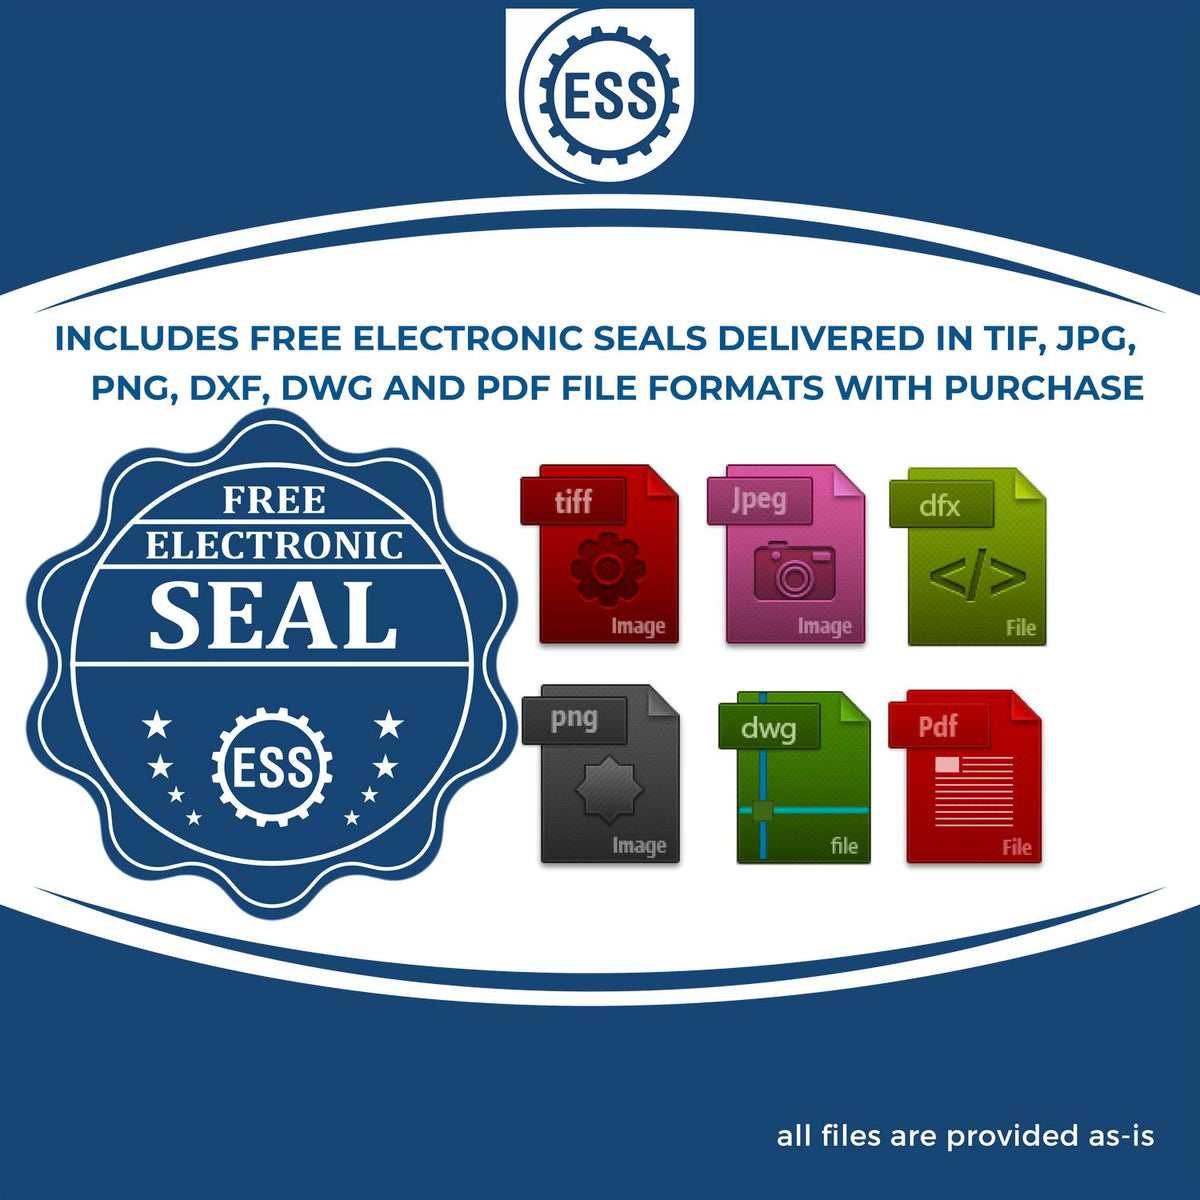 An infographic for the free electronic seal for the Premium MaxLight Pre-Inked Virginia Engineering Stamp illustrating the different file type icons such as DXF, DWG, TIF, JPG and PNG.